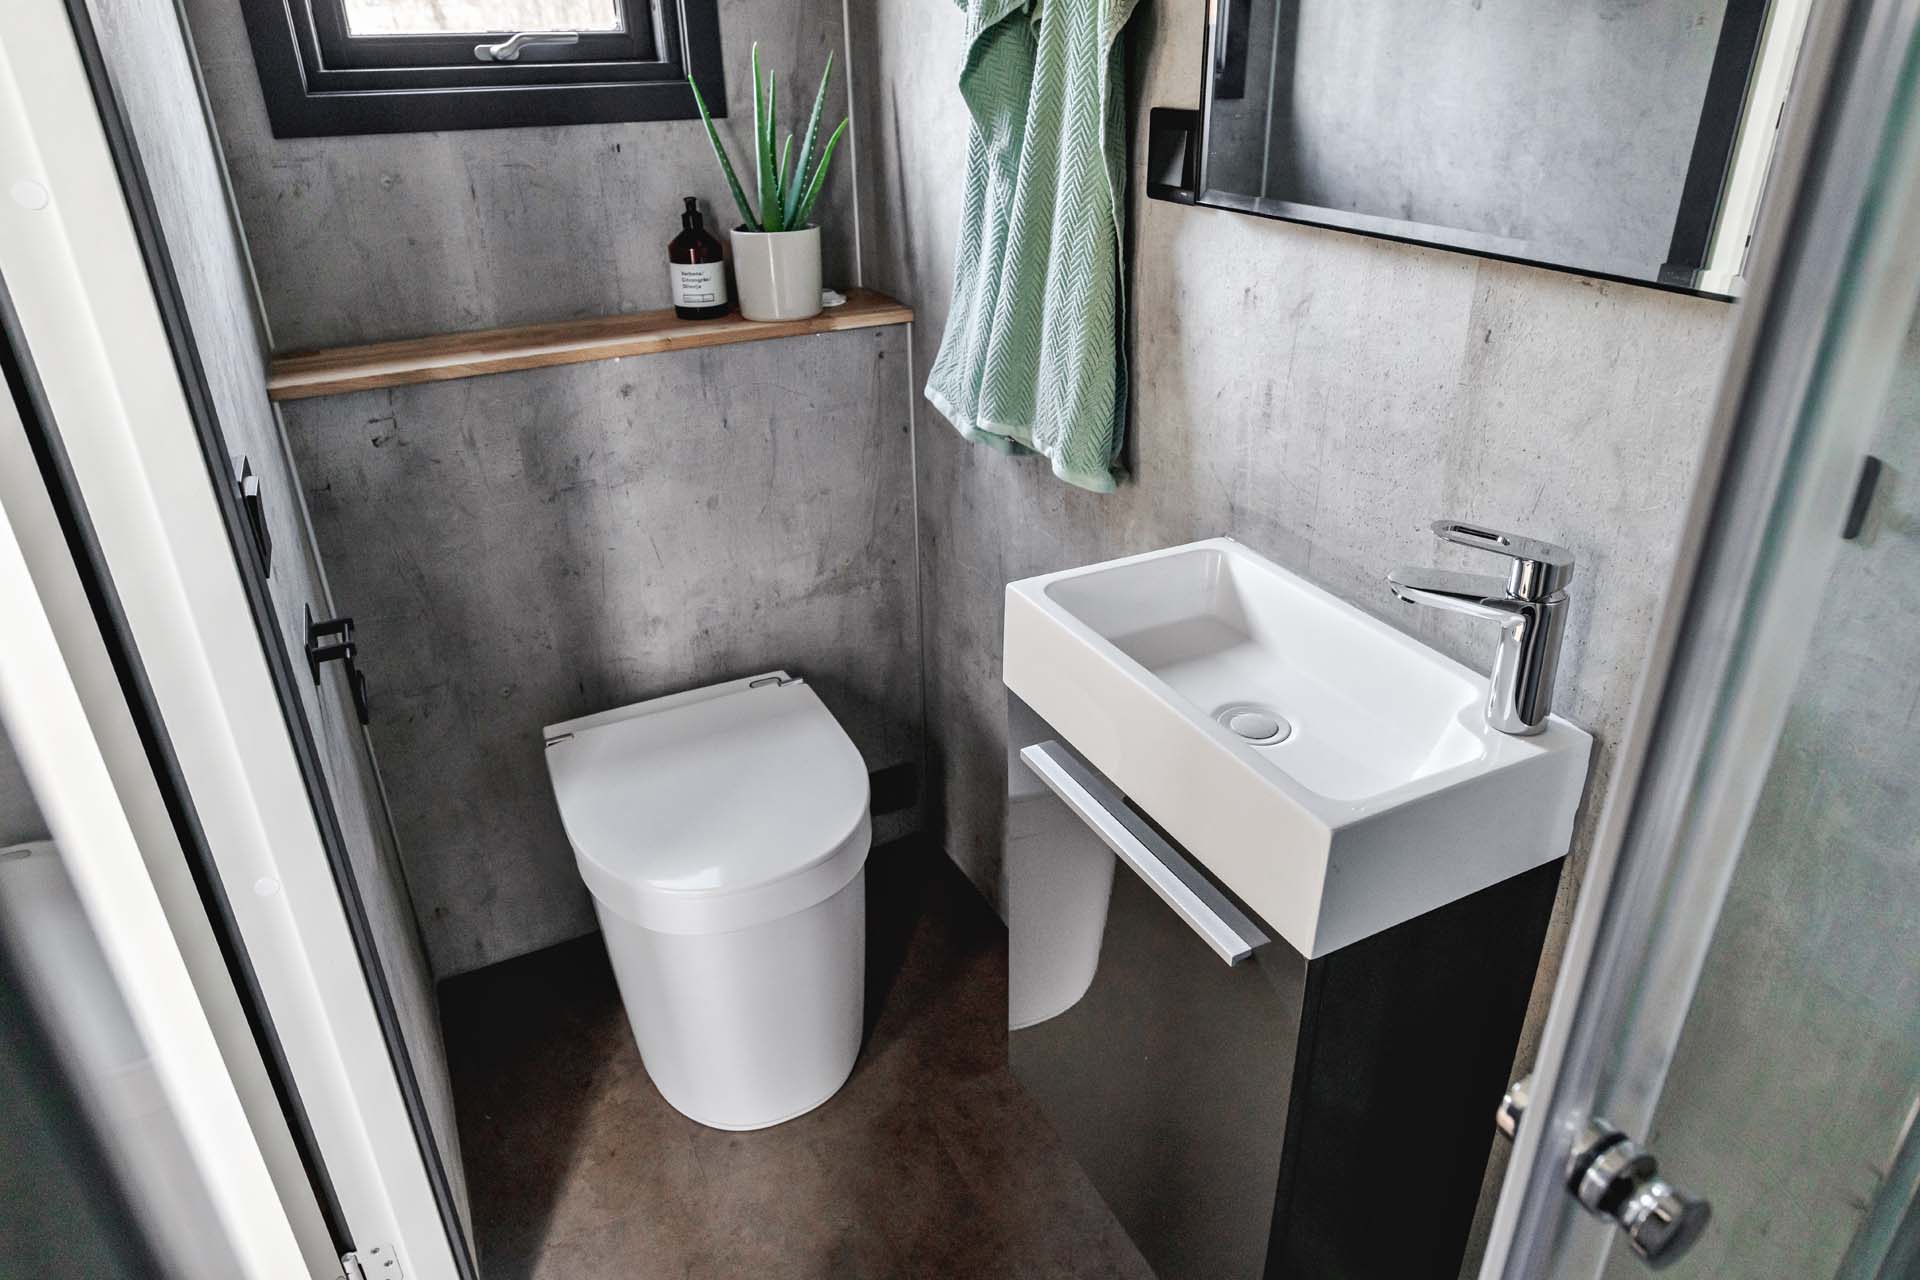 A compost toilet in a small bathroom